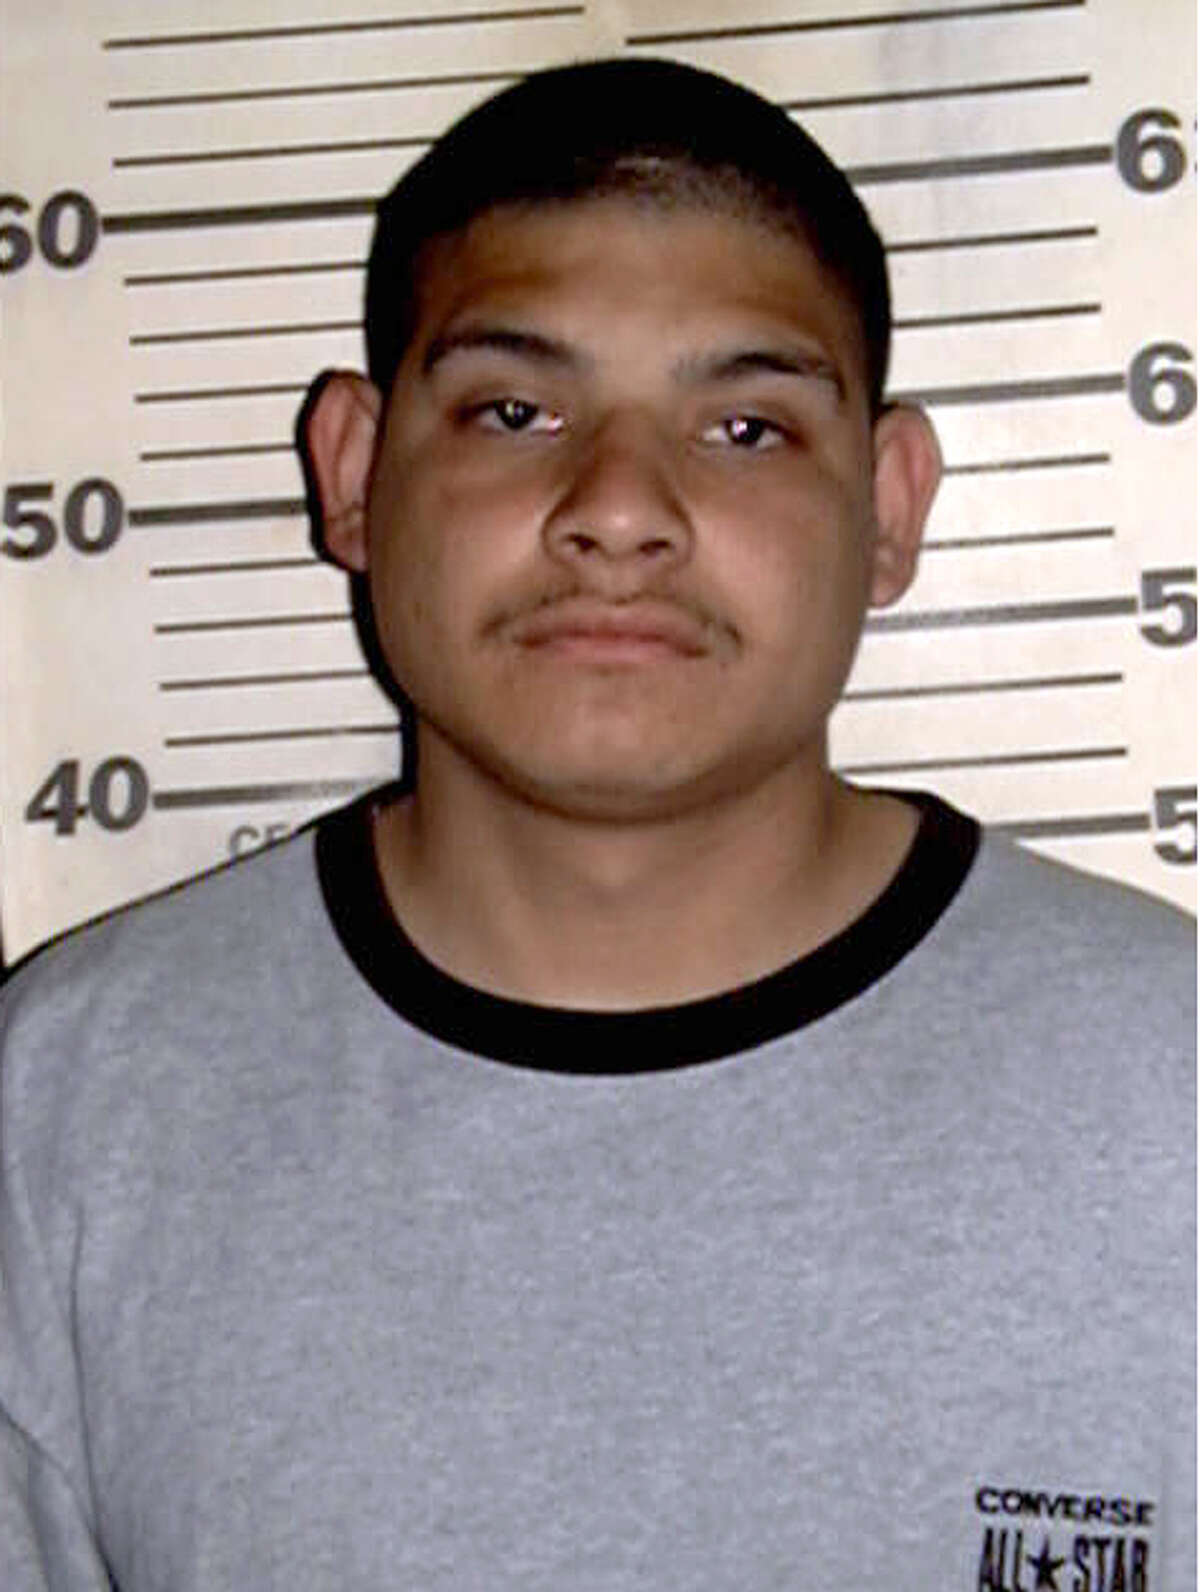 Joseph Gamboa Age: 29 Execution: Still on death row Summary: Gamboa was convicted of burglarizing a business and shooting and killing two men.